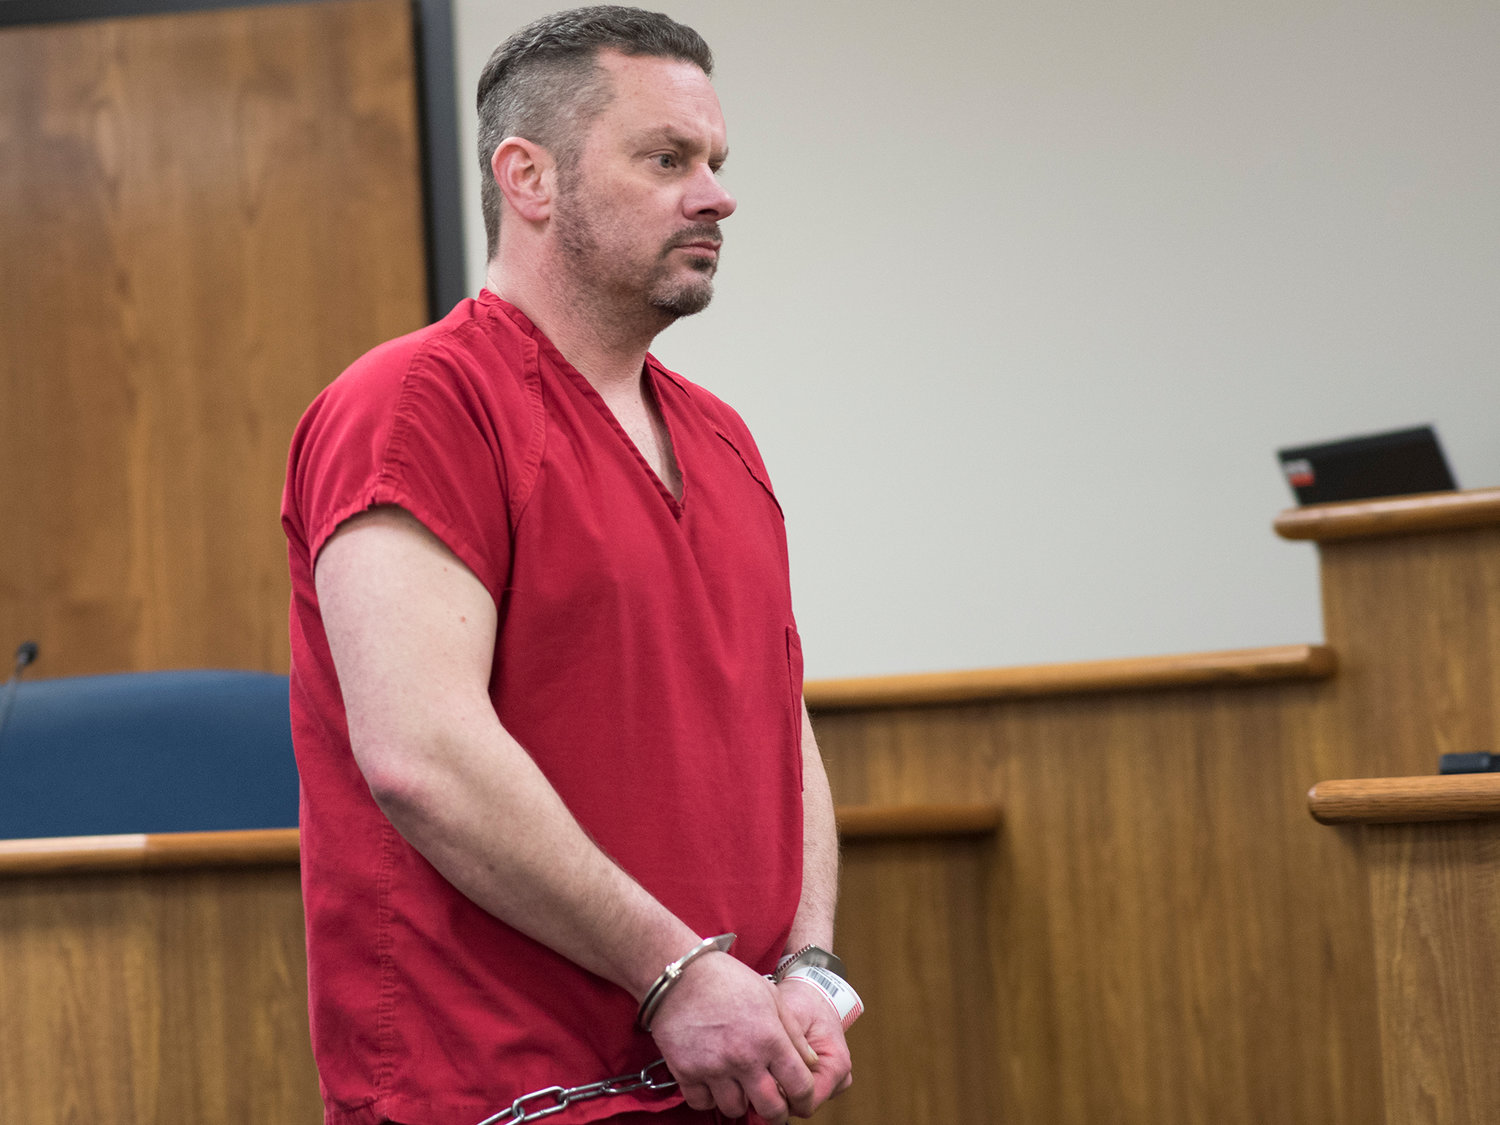 Justin G. Bonifield, 47, makes an appearance in Lewis County Superior Court on Wednesday afternoon at the Lewis County Law and Justice Center in Chehalis.